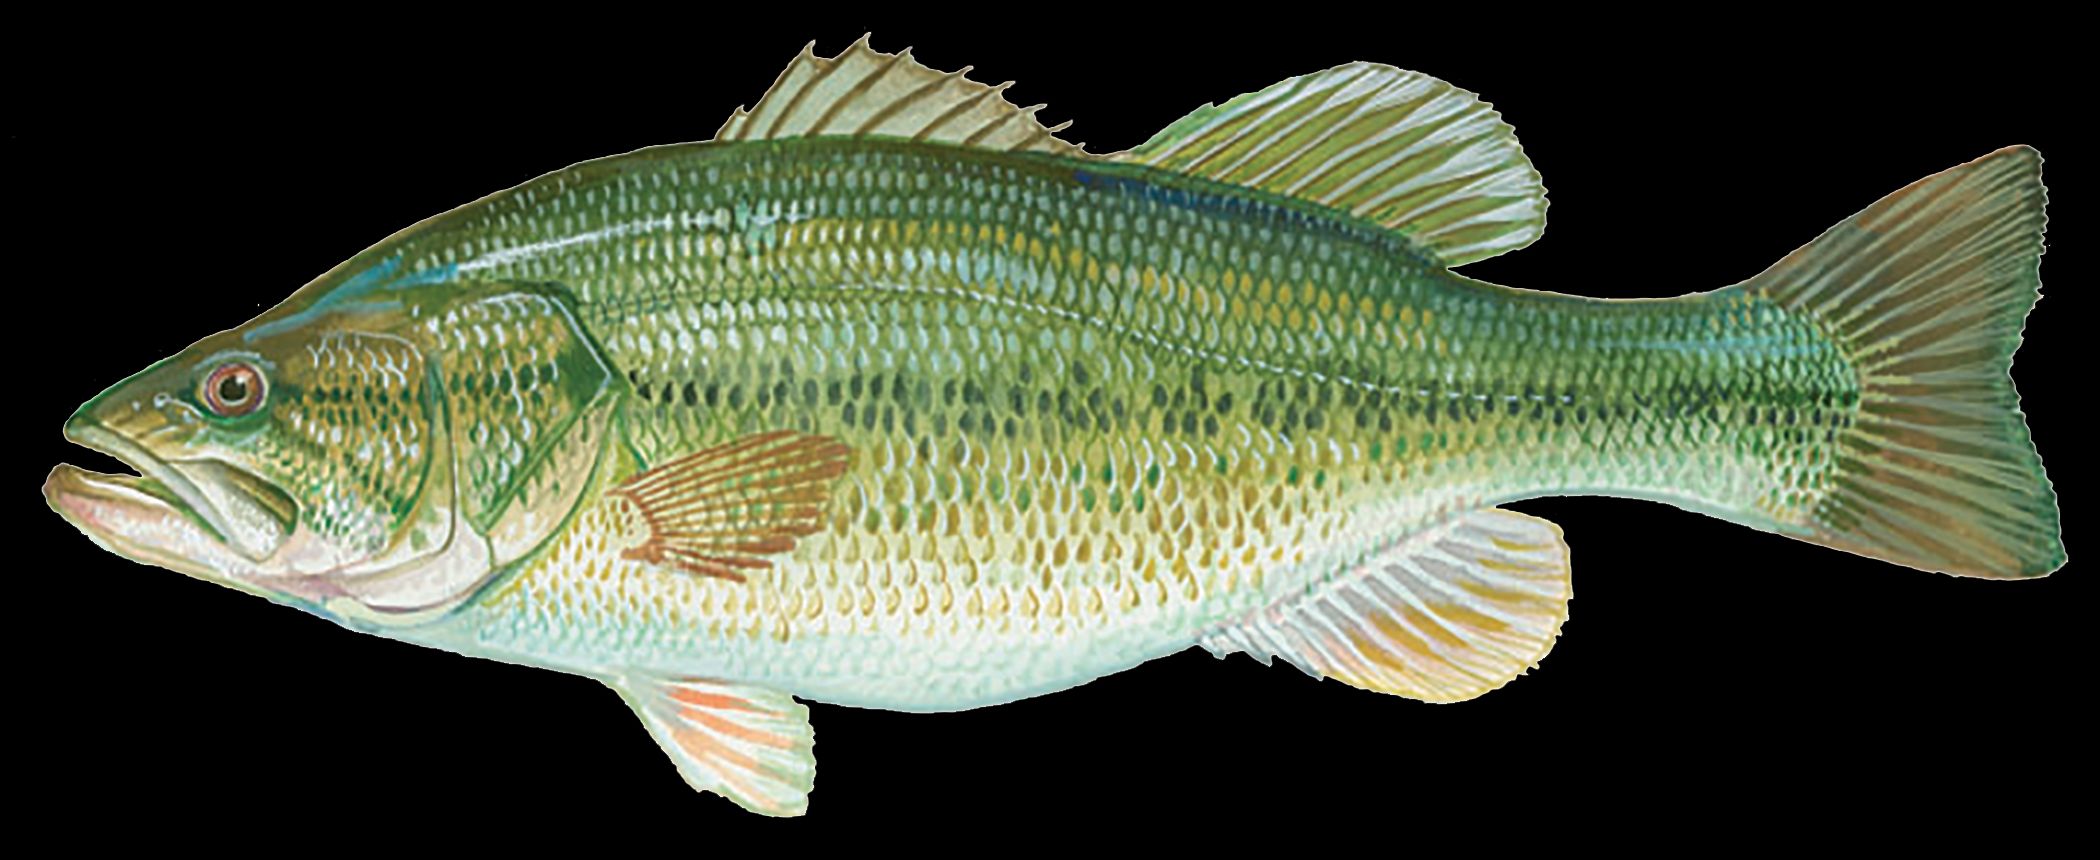 Species Spotlight: Largemouth Bass and Tips to Catch Them – AFTCO